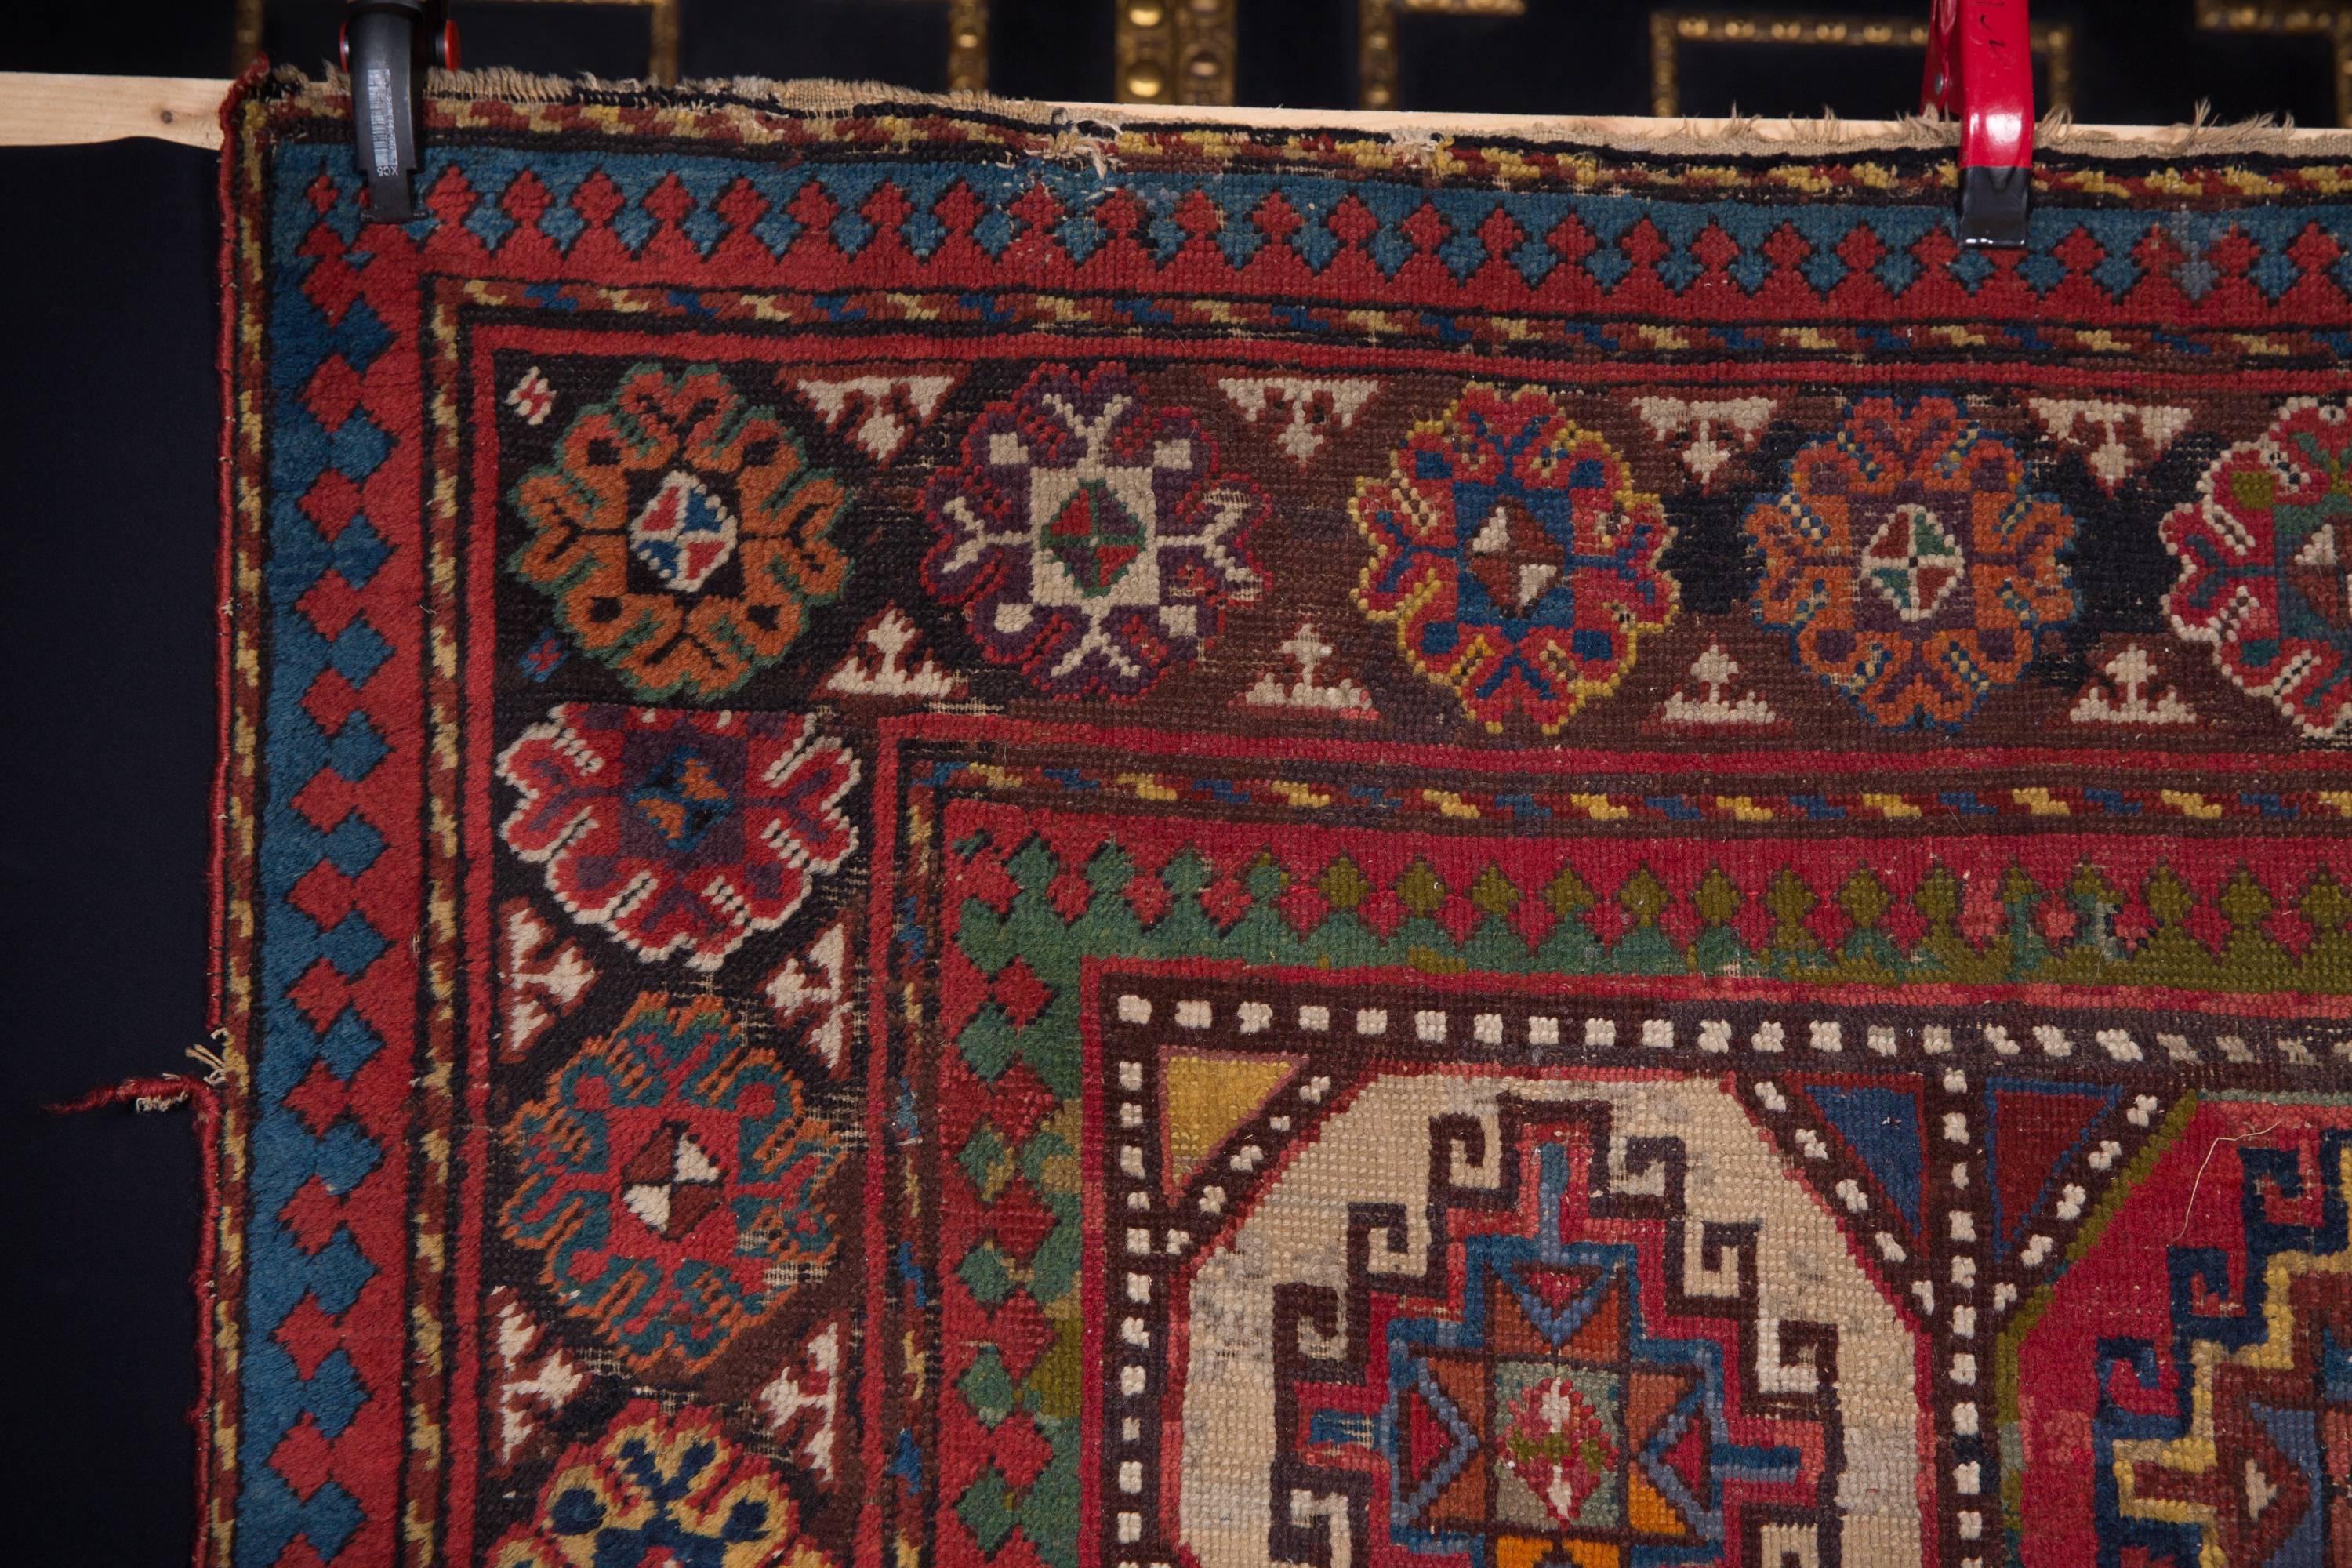 Beautiful rare Moghan Kasak. From Berlin villa resolution, 123 cm x 265 cm.

Please take a look at the detailed pictures.